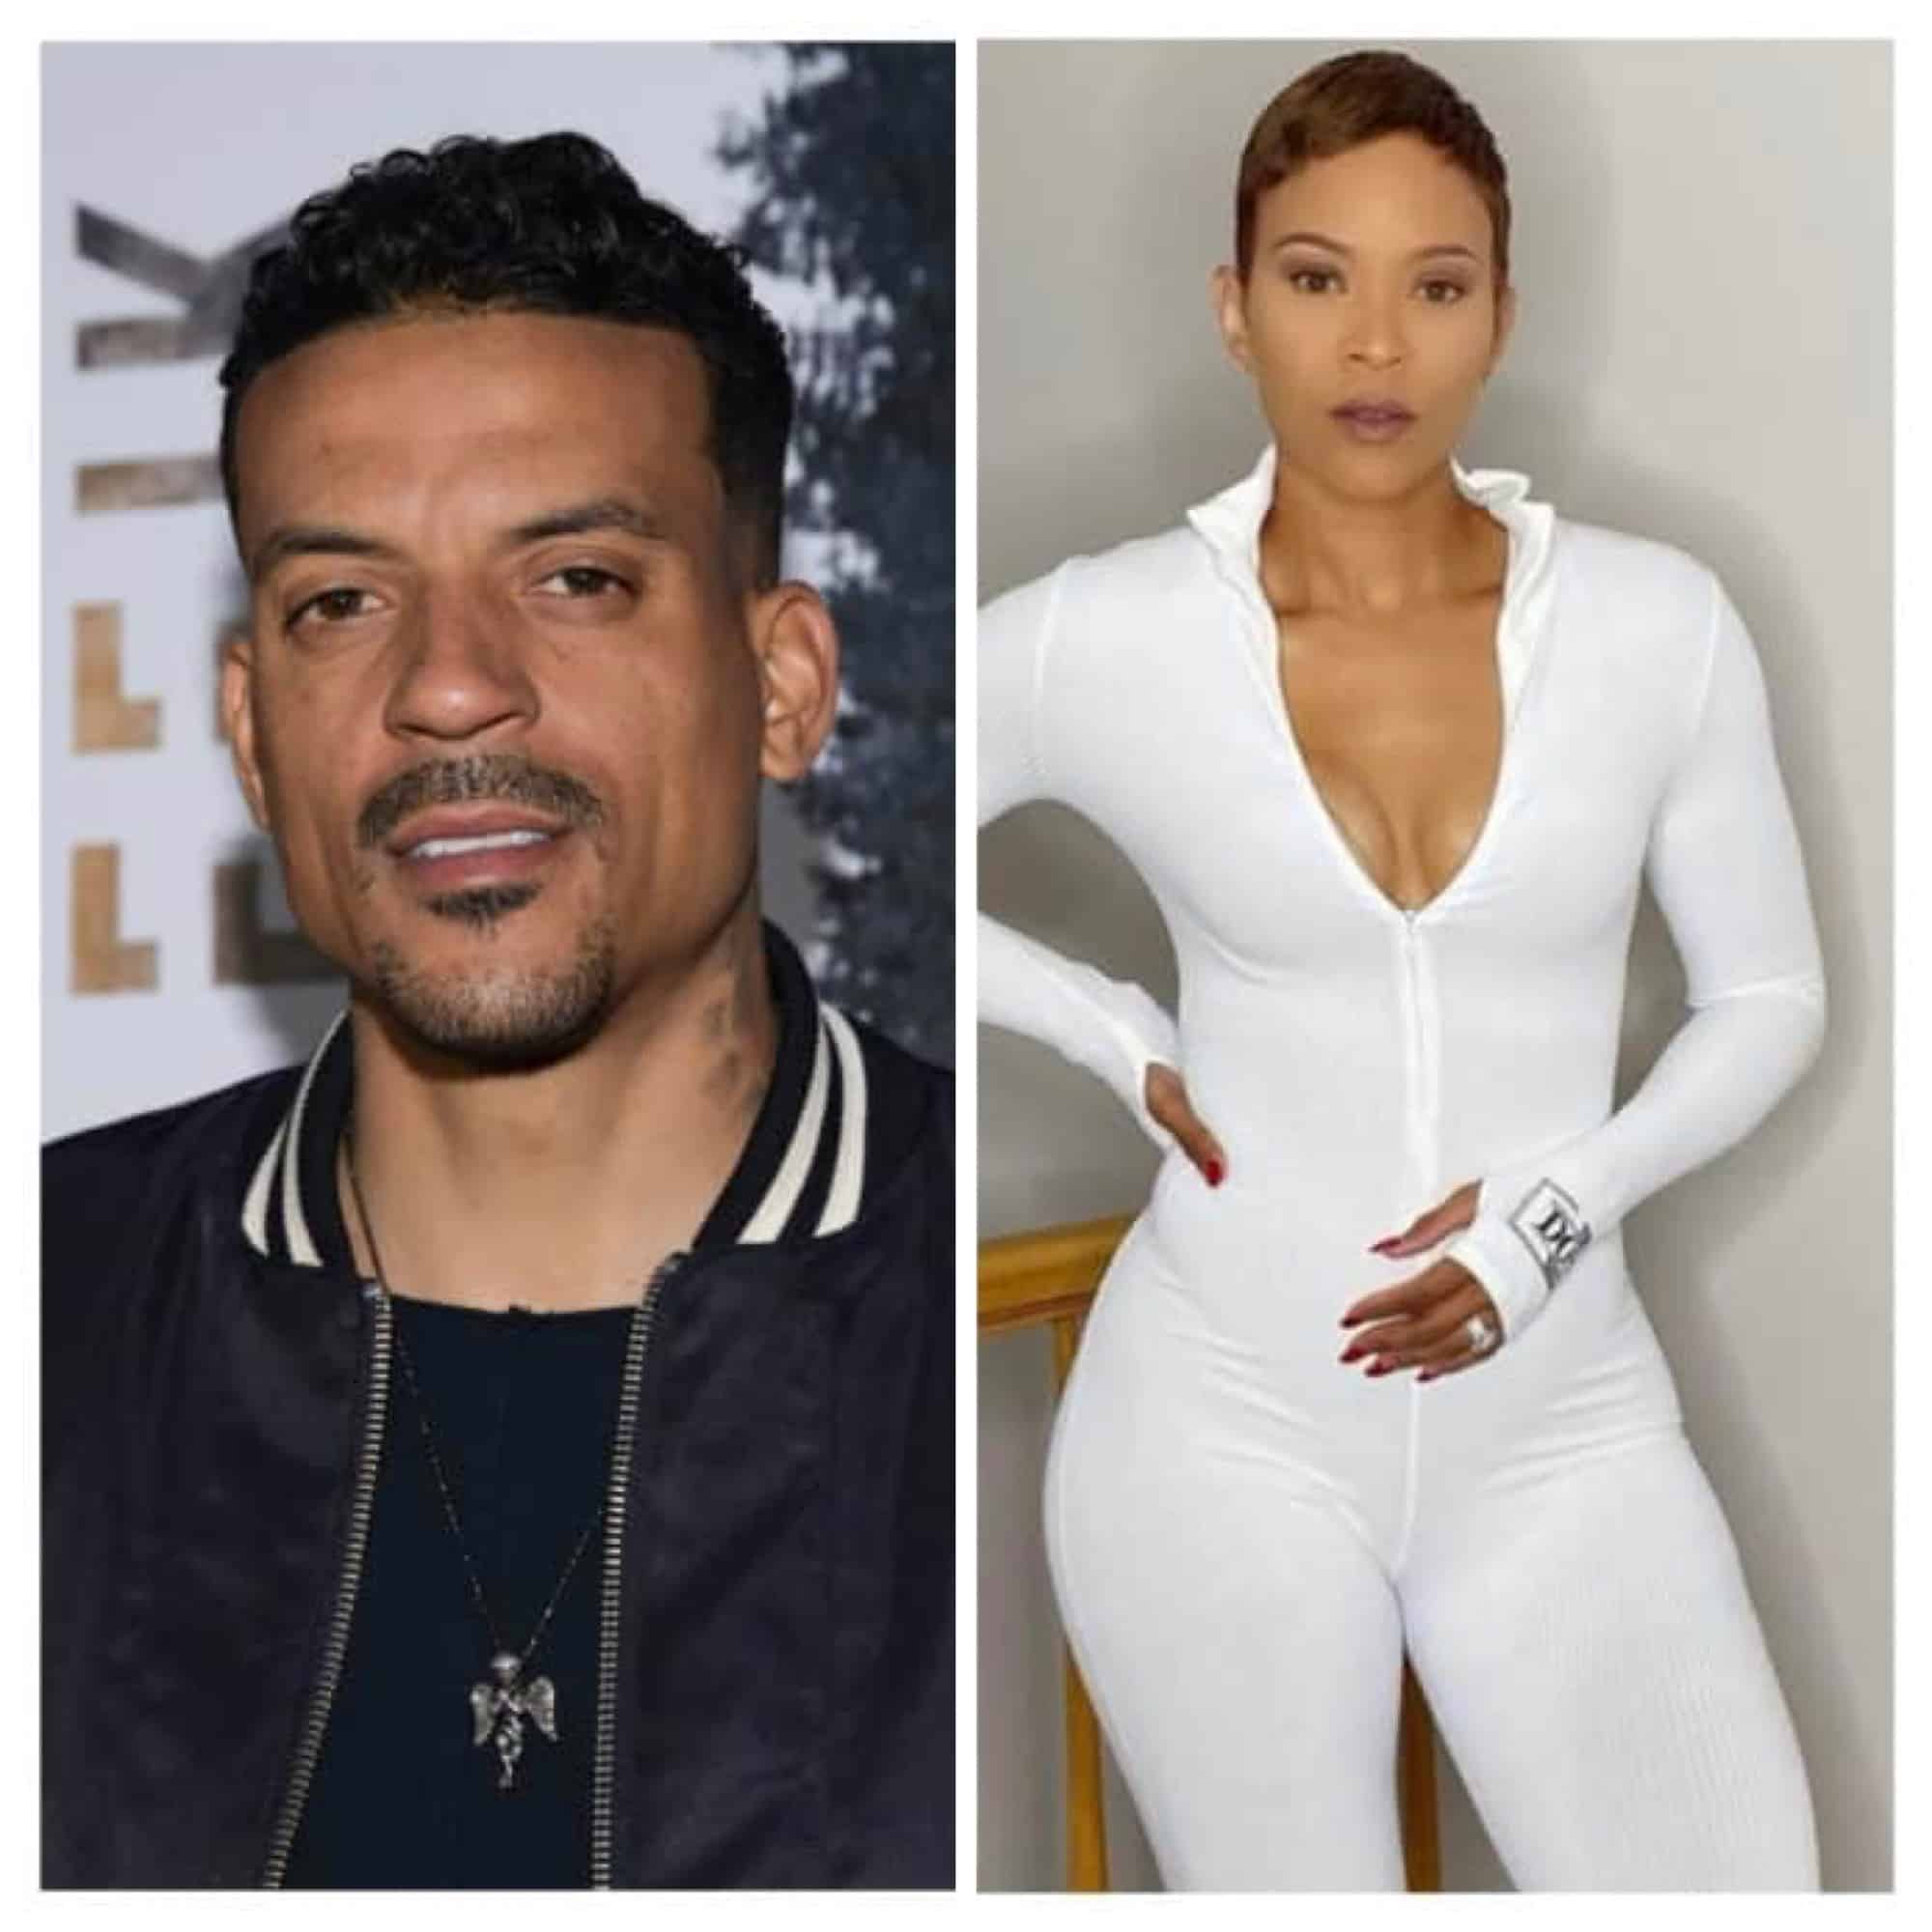 Matt Barnes Suggests Sabrina Parr Is An Attention-Seeker After She Posts #BussItChallenge—“That’s All Her Plan Has Ever Been”